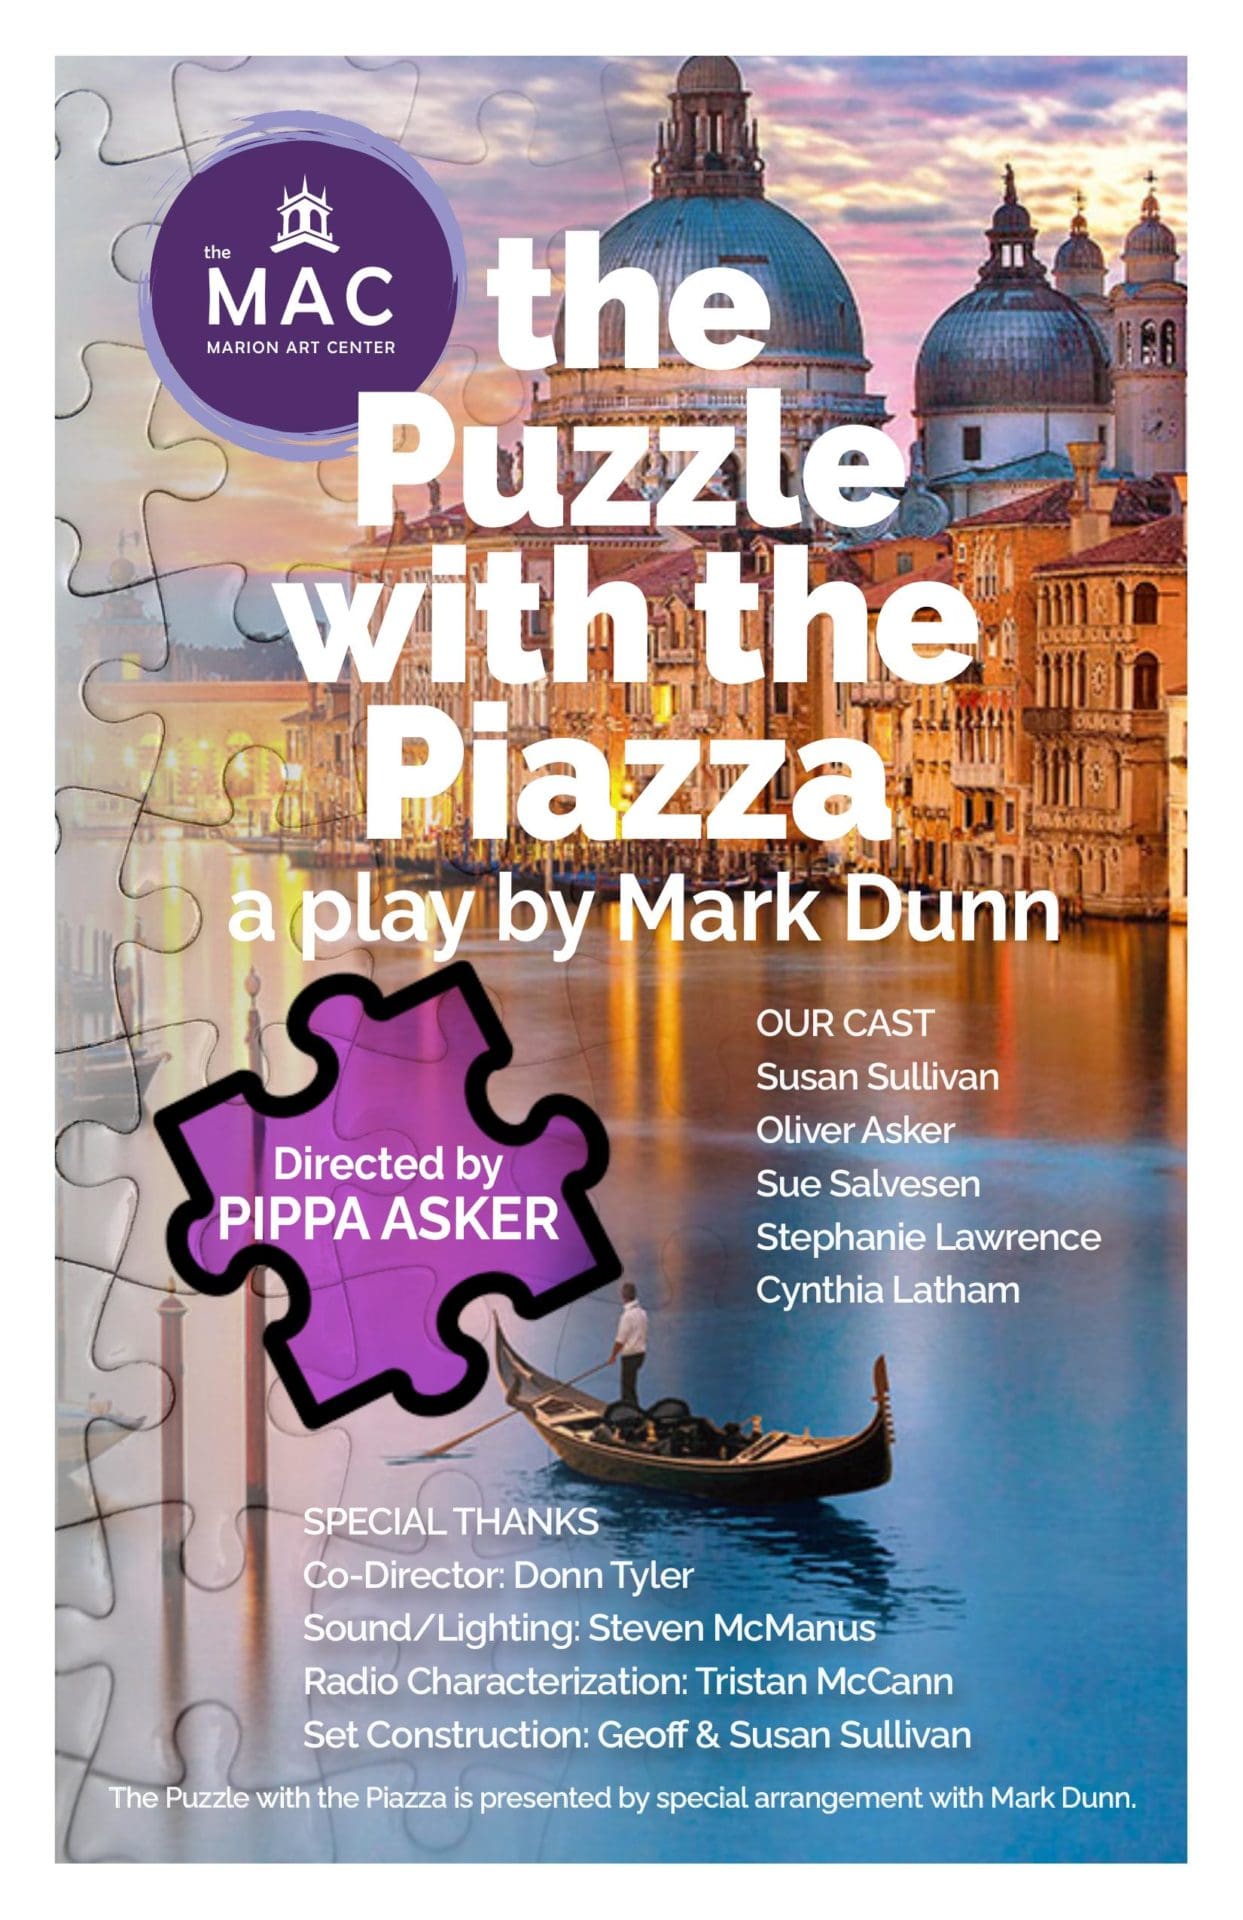 The Puzzle with the Piazza